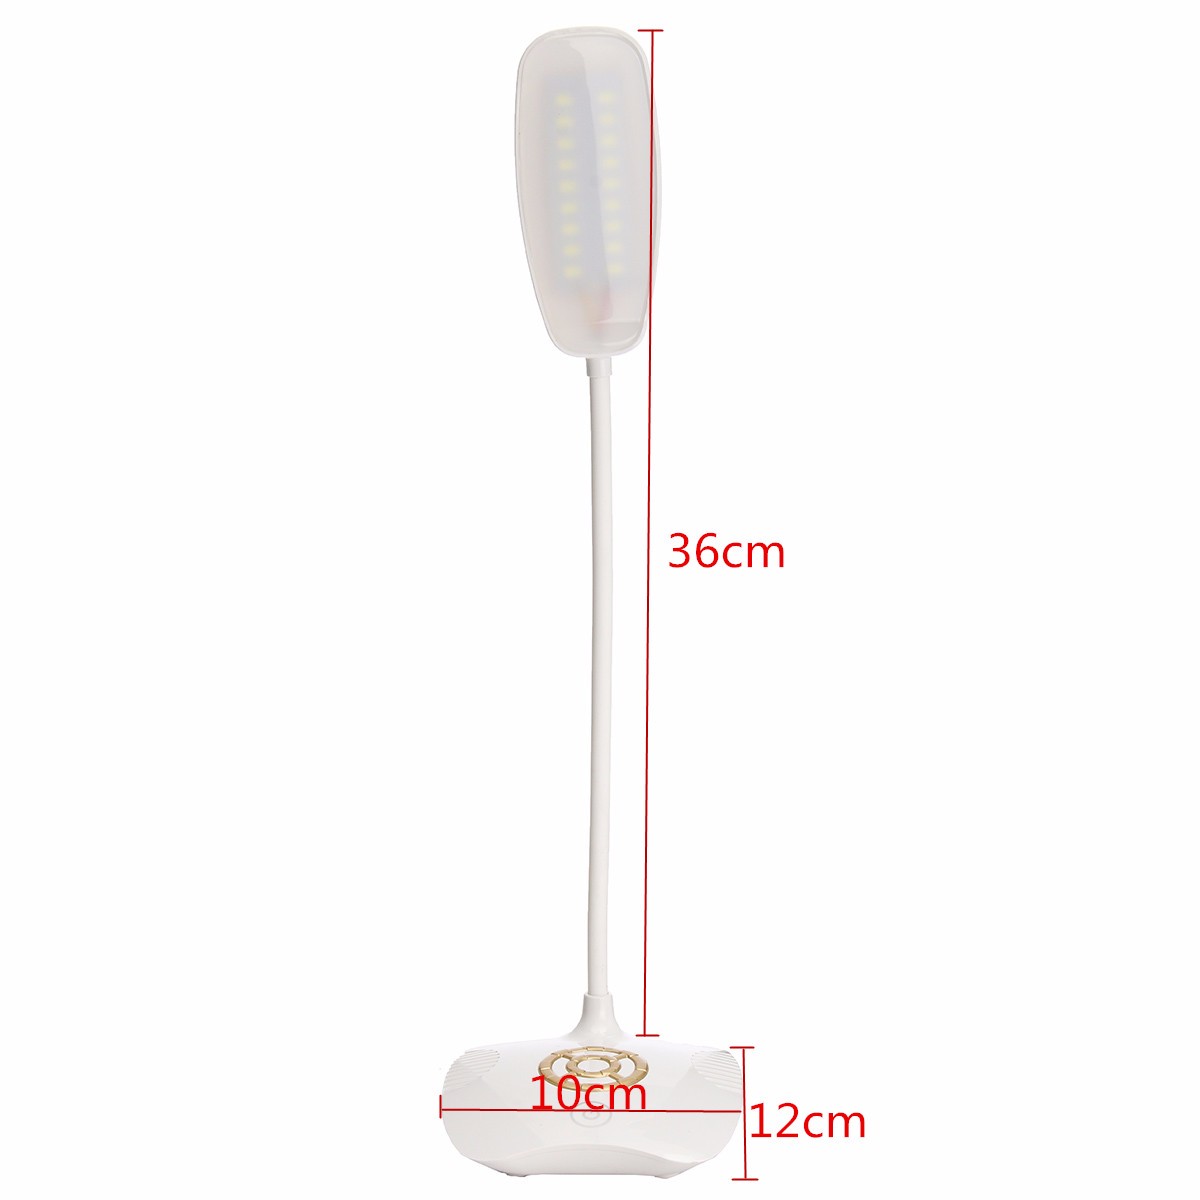 Flexible-Rechargeable-Dimmable-USB-LED-Night-Light-Bedside-Desktop-Reading-Table-Lamp-1118136